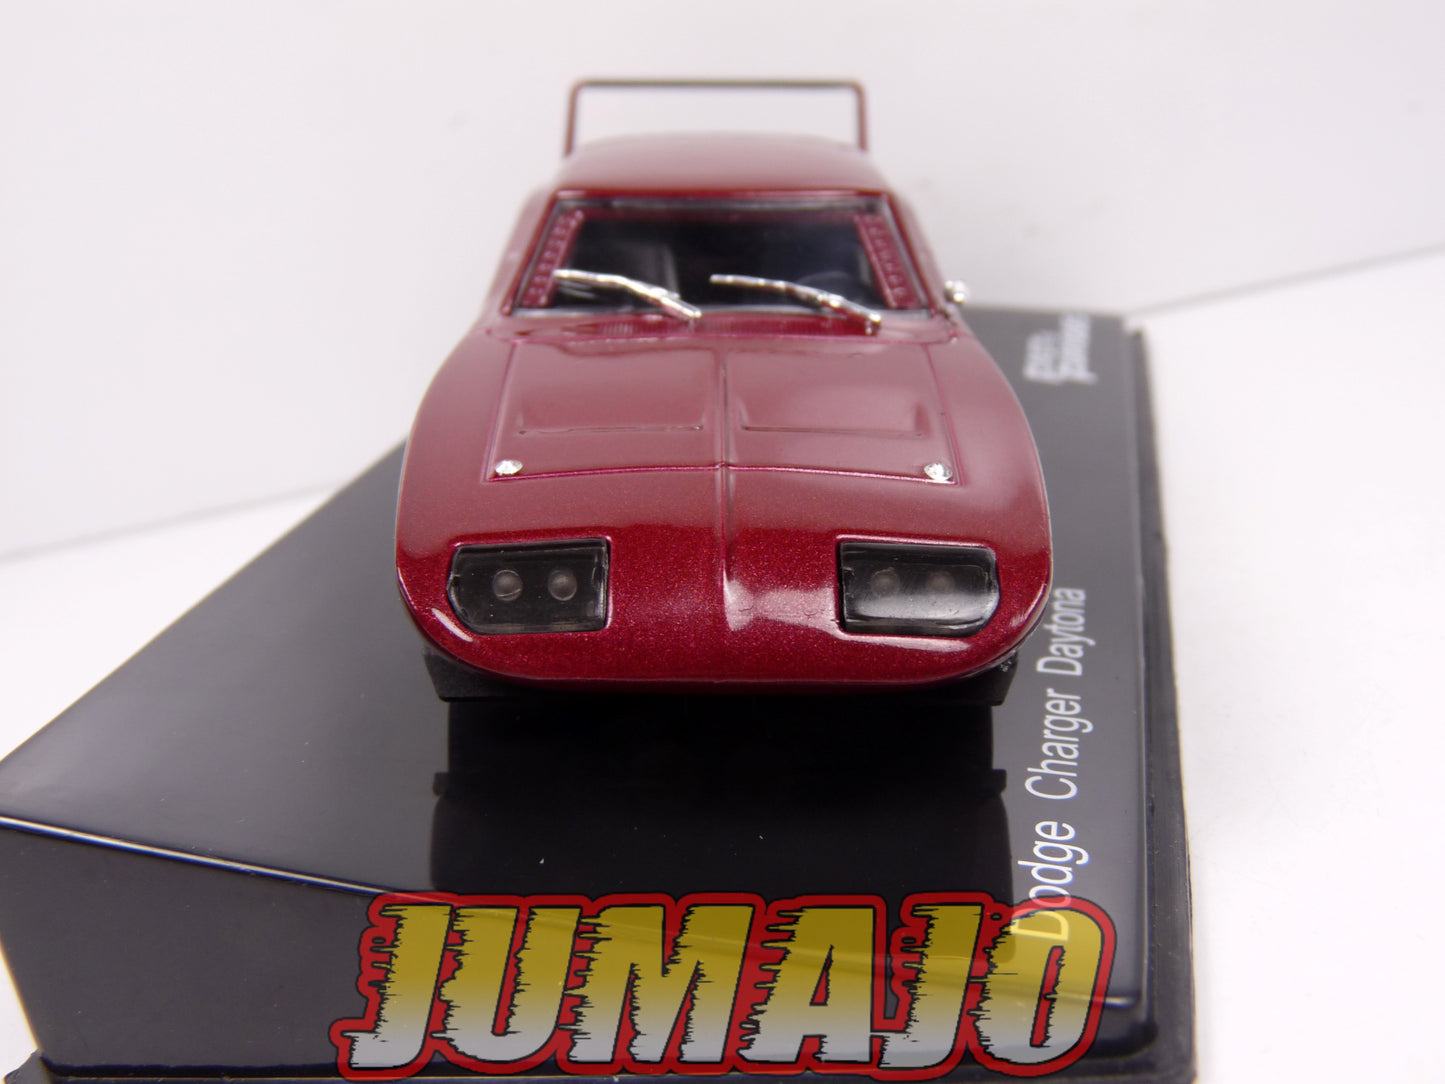 FF5 Voiture 1/43 IXO altaya Fast and Furious : Dodge Charger Daytona